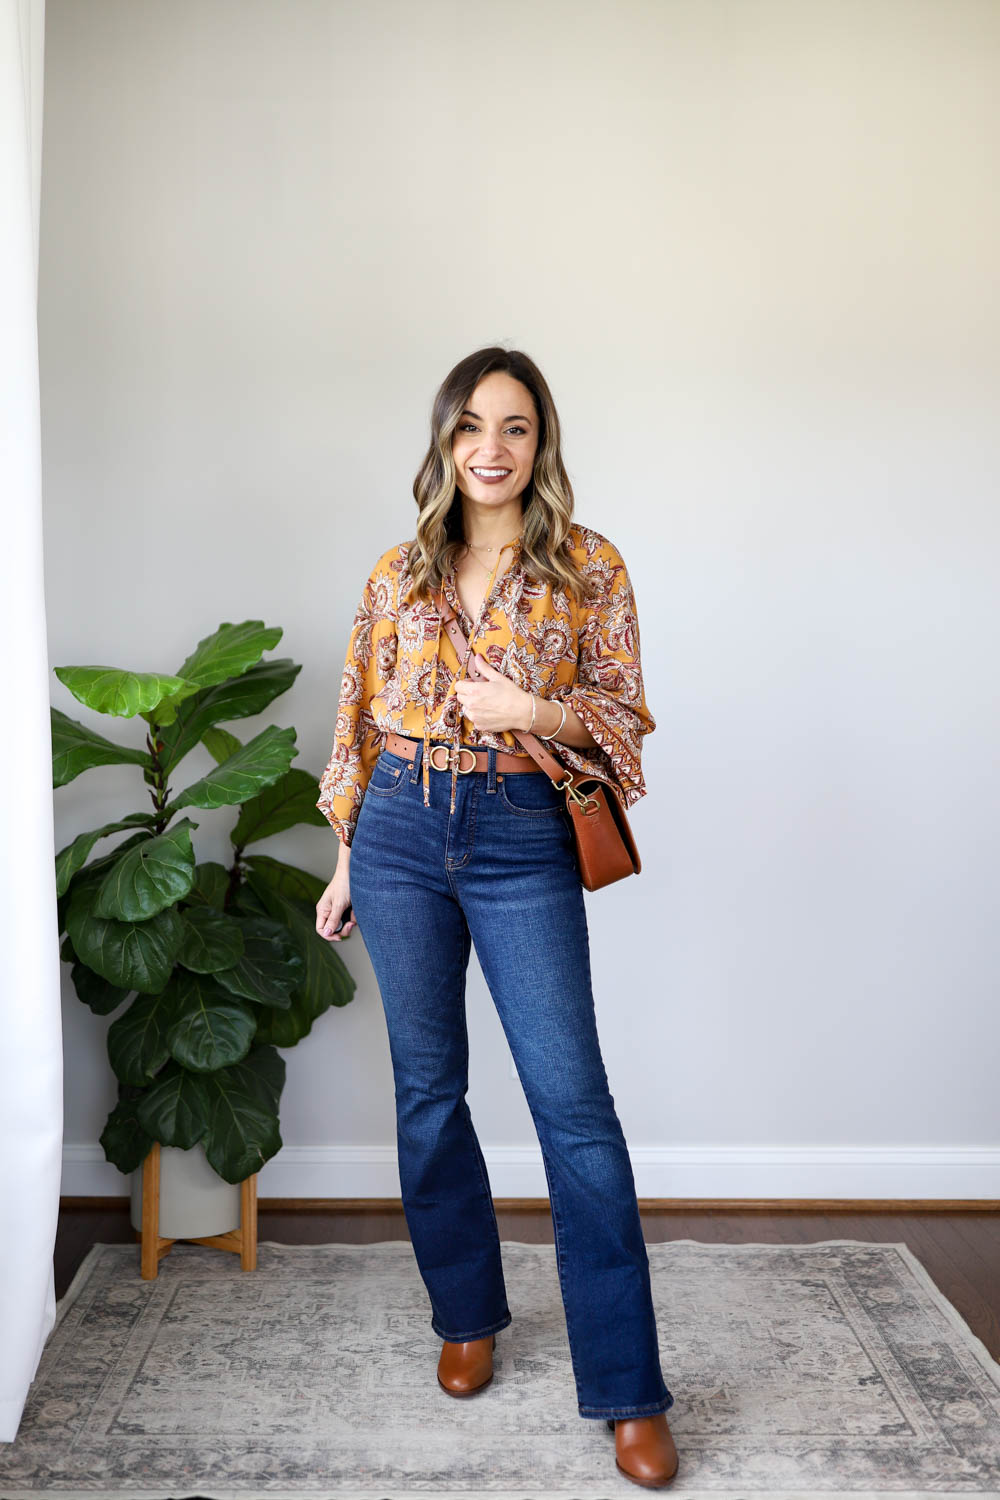 How To Style Flared Jeans For Fall - Pardon Muah – Pardon Muah